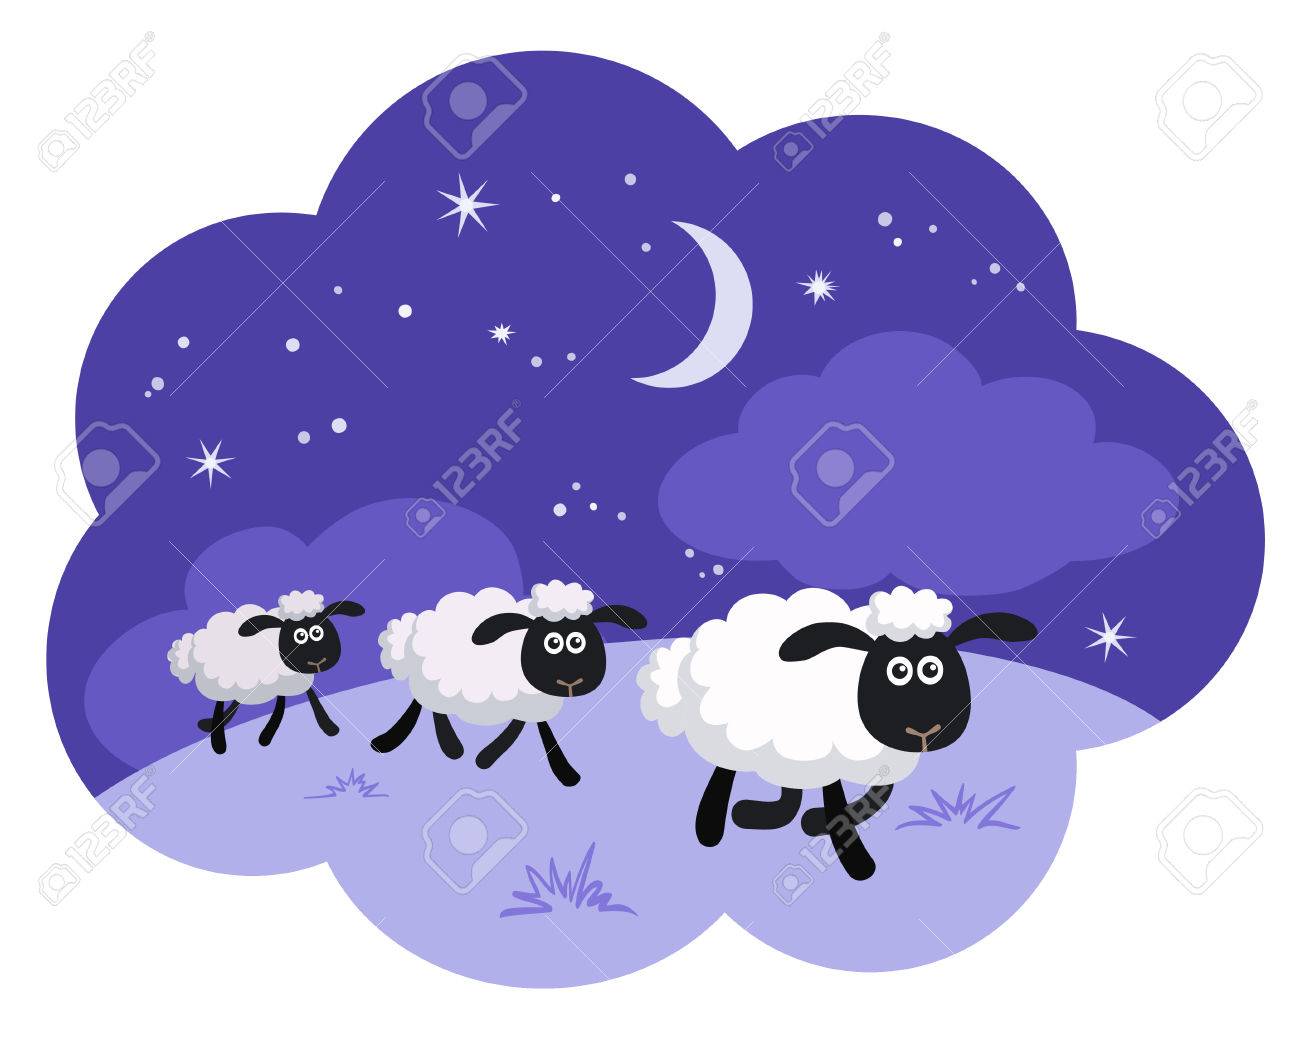 Counting Sheep In The Night Background A Dream Bubble Isolated